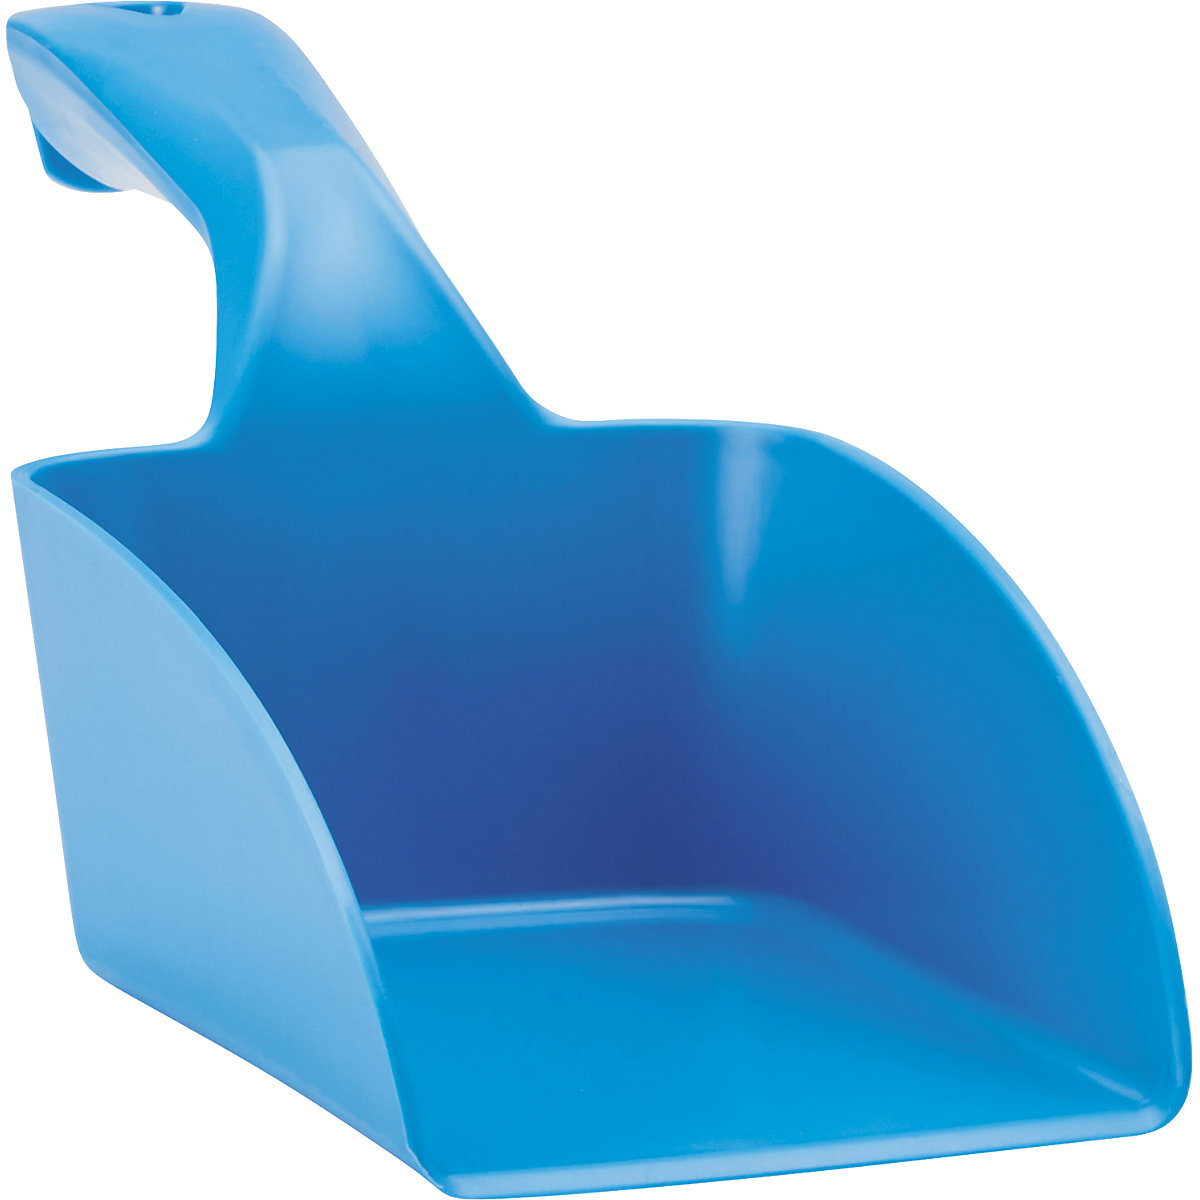 Hand shovel, suitable for foodstuffs – Vikan, capacity 1 l, pack of 12, blue-9